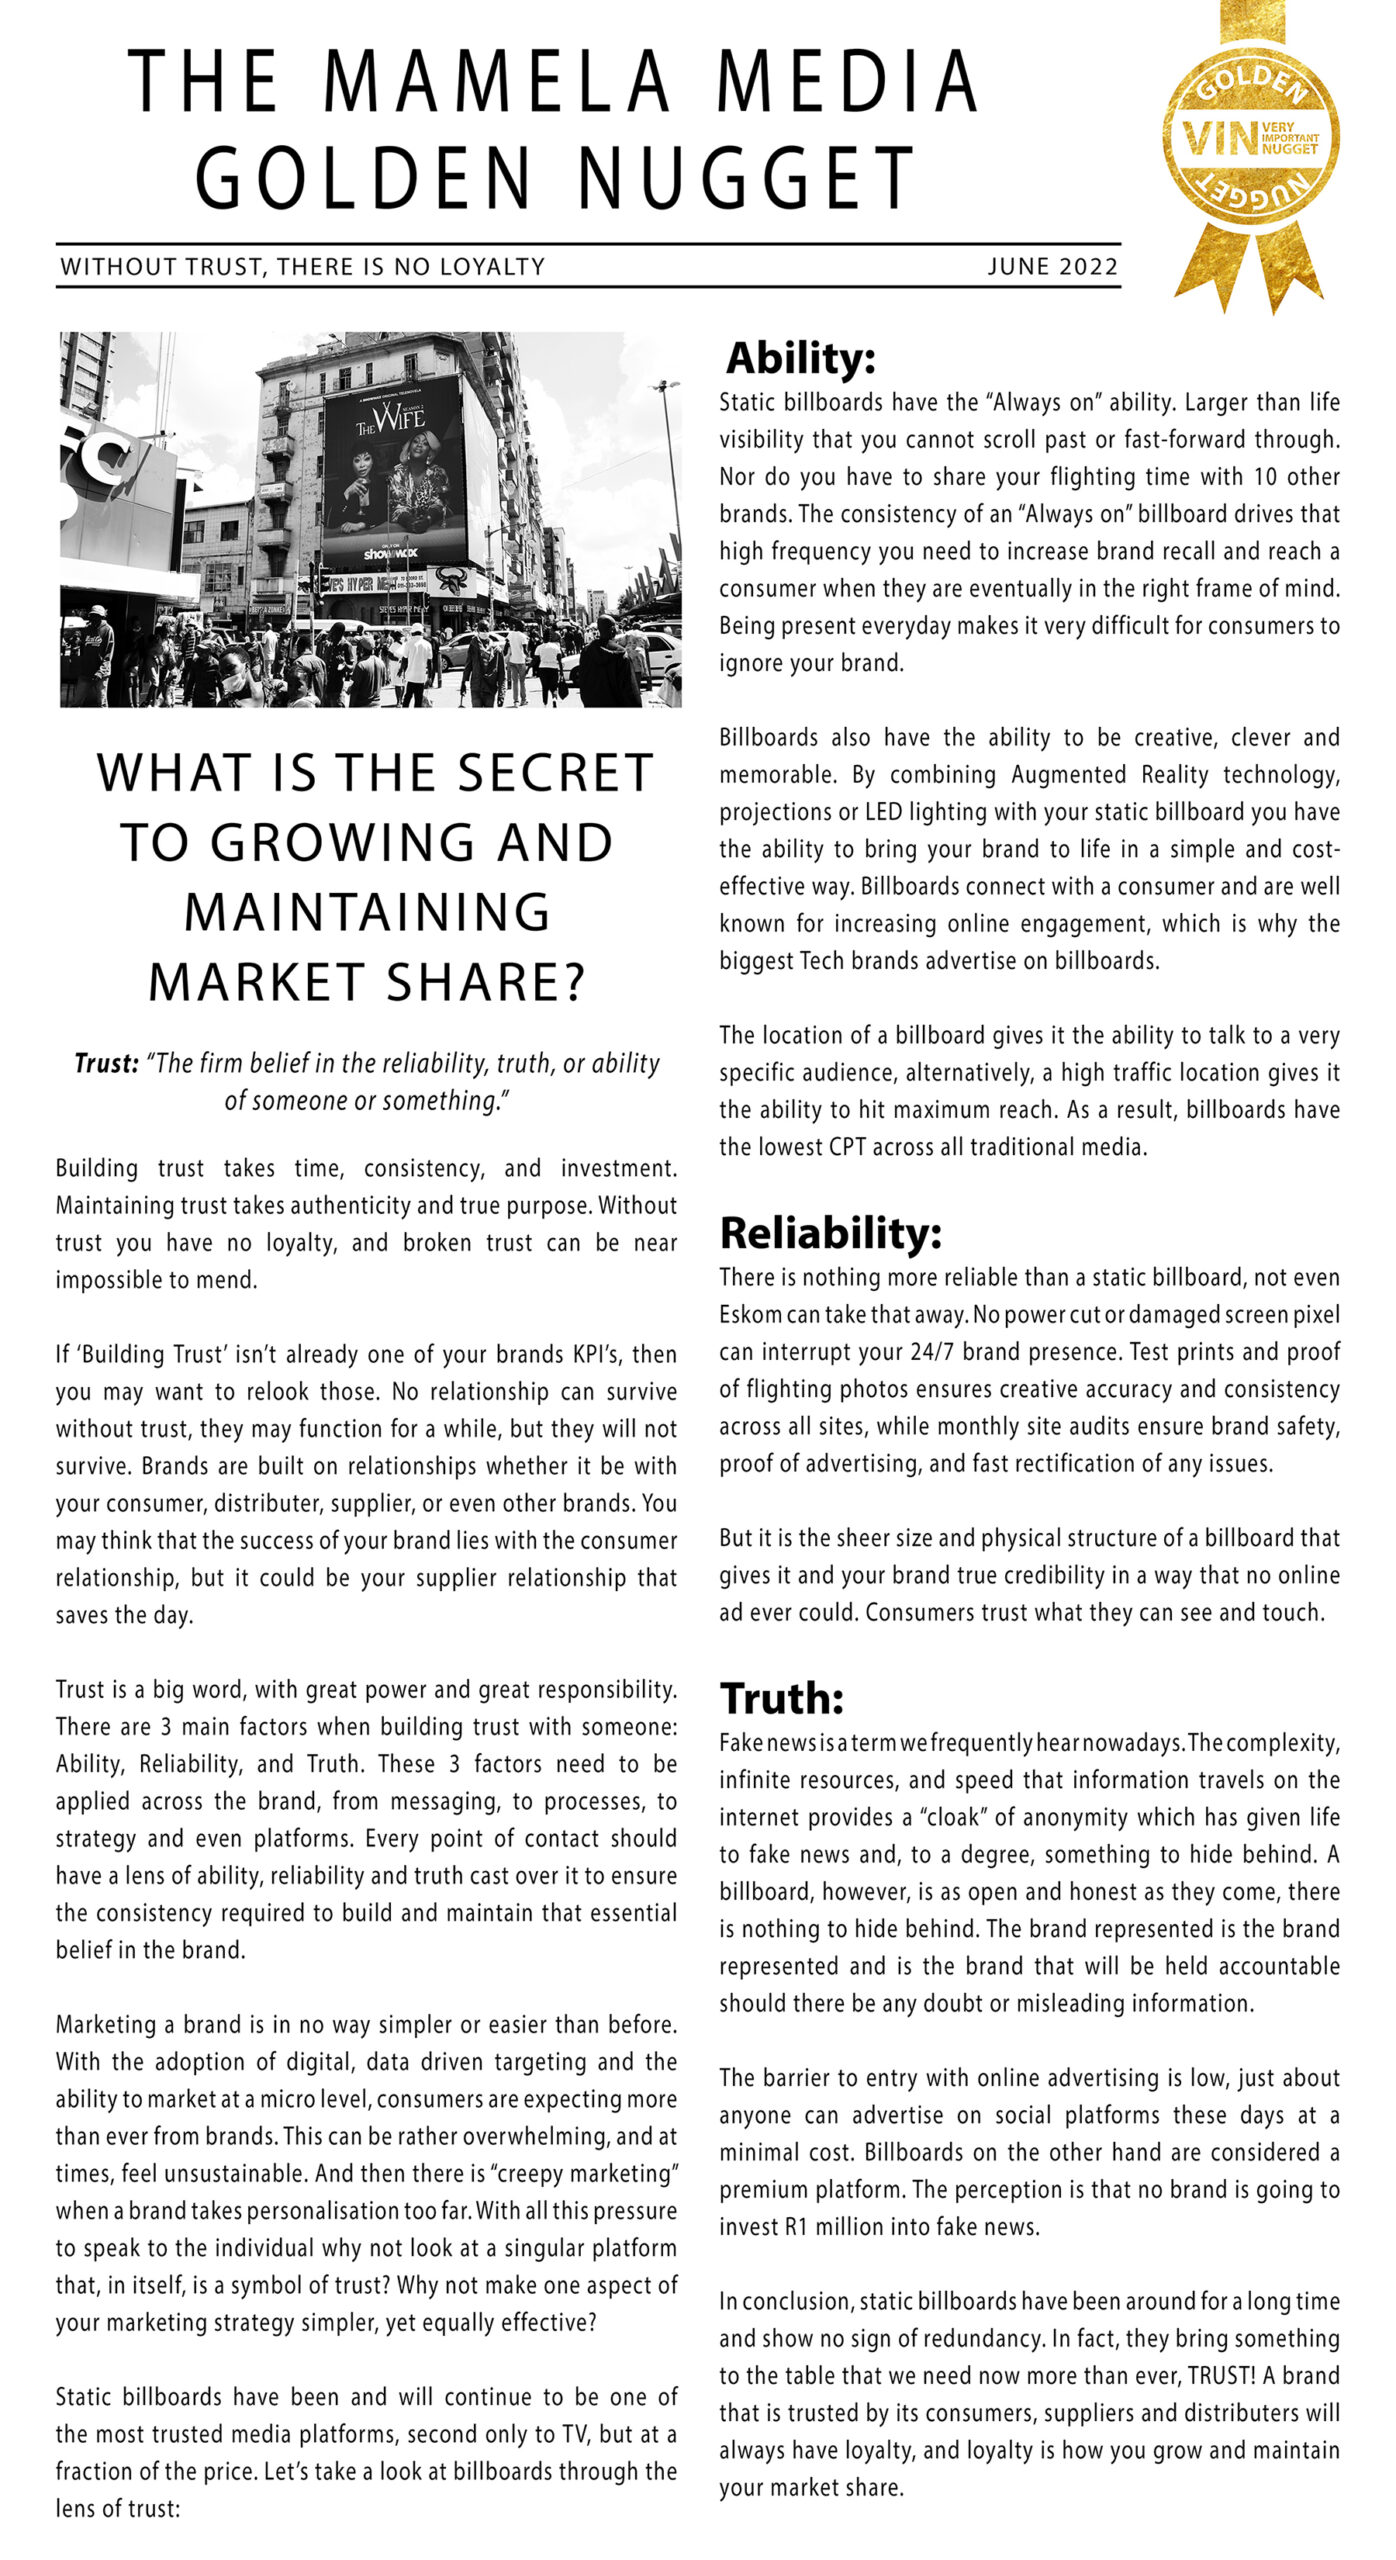 The secret to growing and maintaining market share. Trust is the key element to market share. 